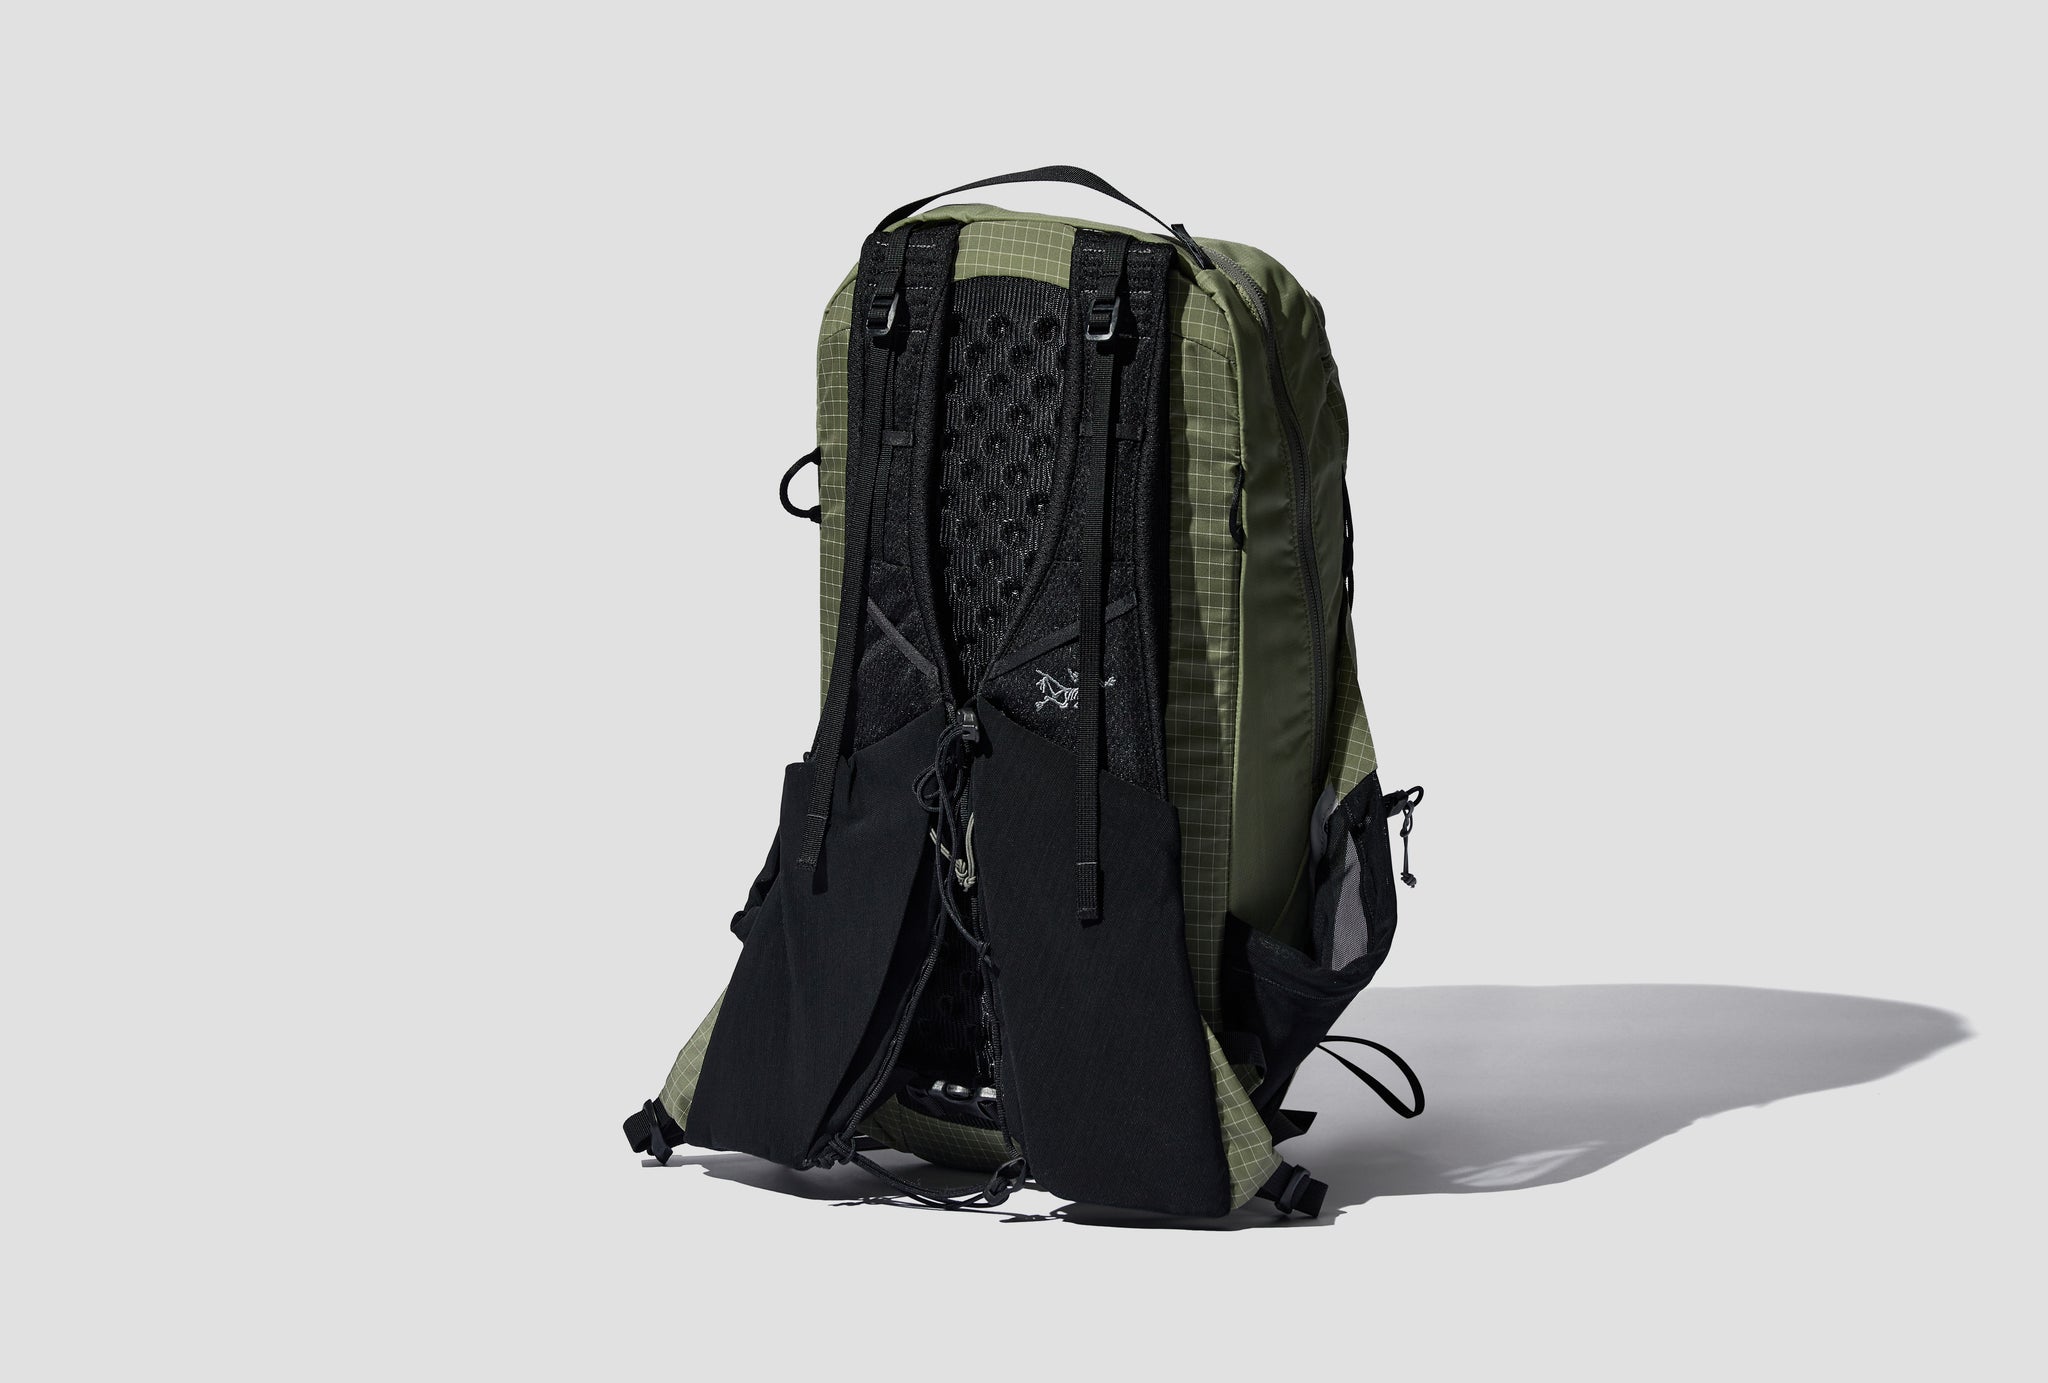 AERIOS 18 BACKPACK X000007822 Light green